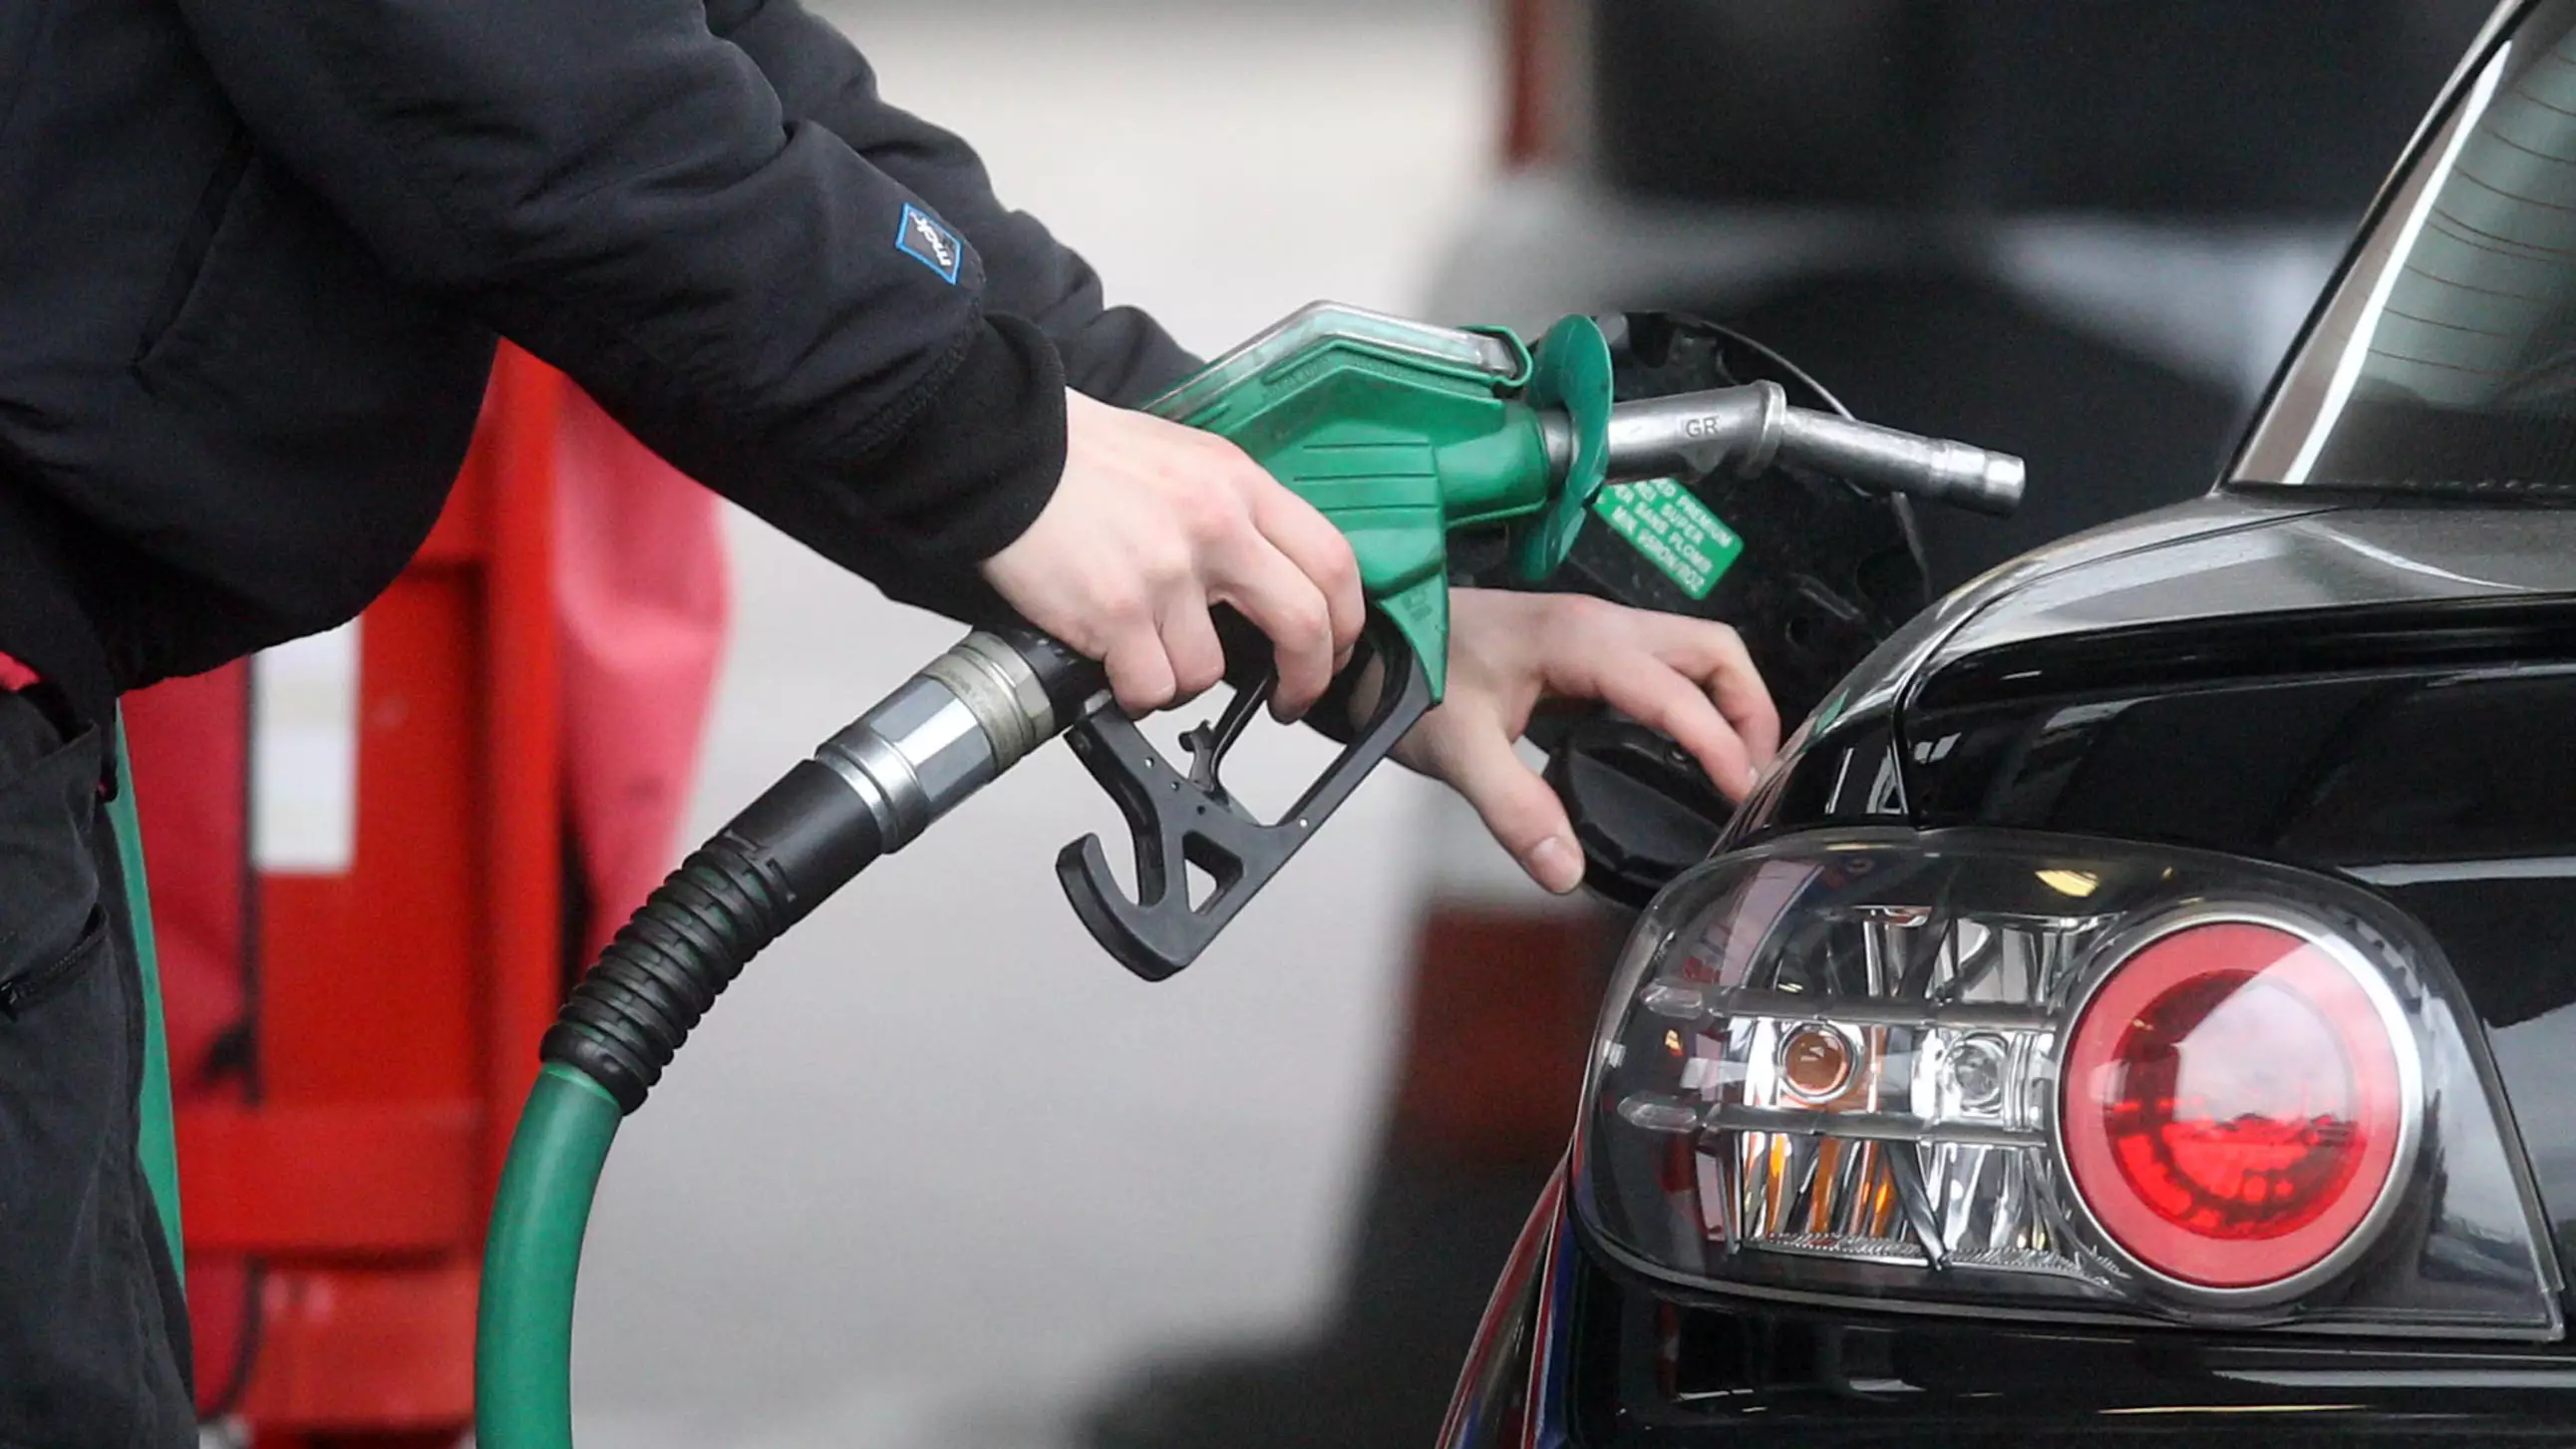 This Hack To Find Out What Side Your Petrol Cap Is On Has Changed Our Lives